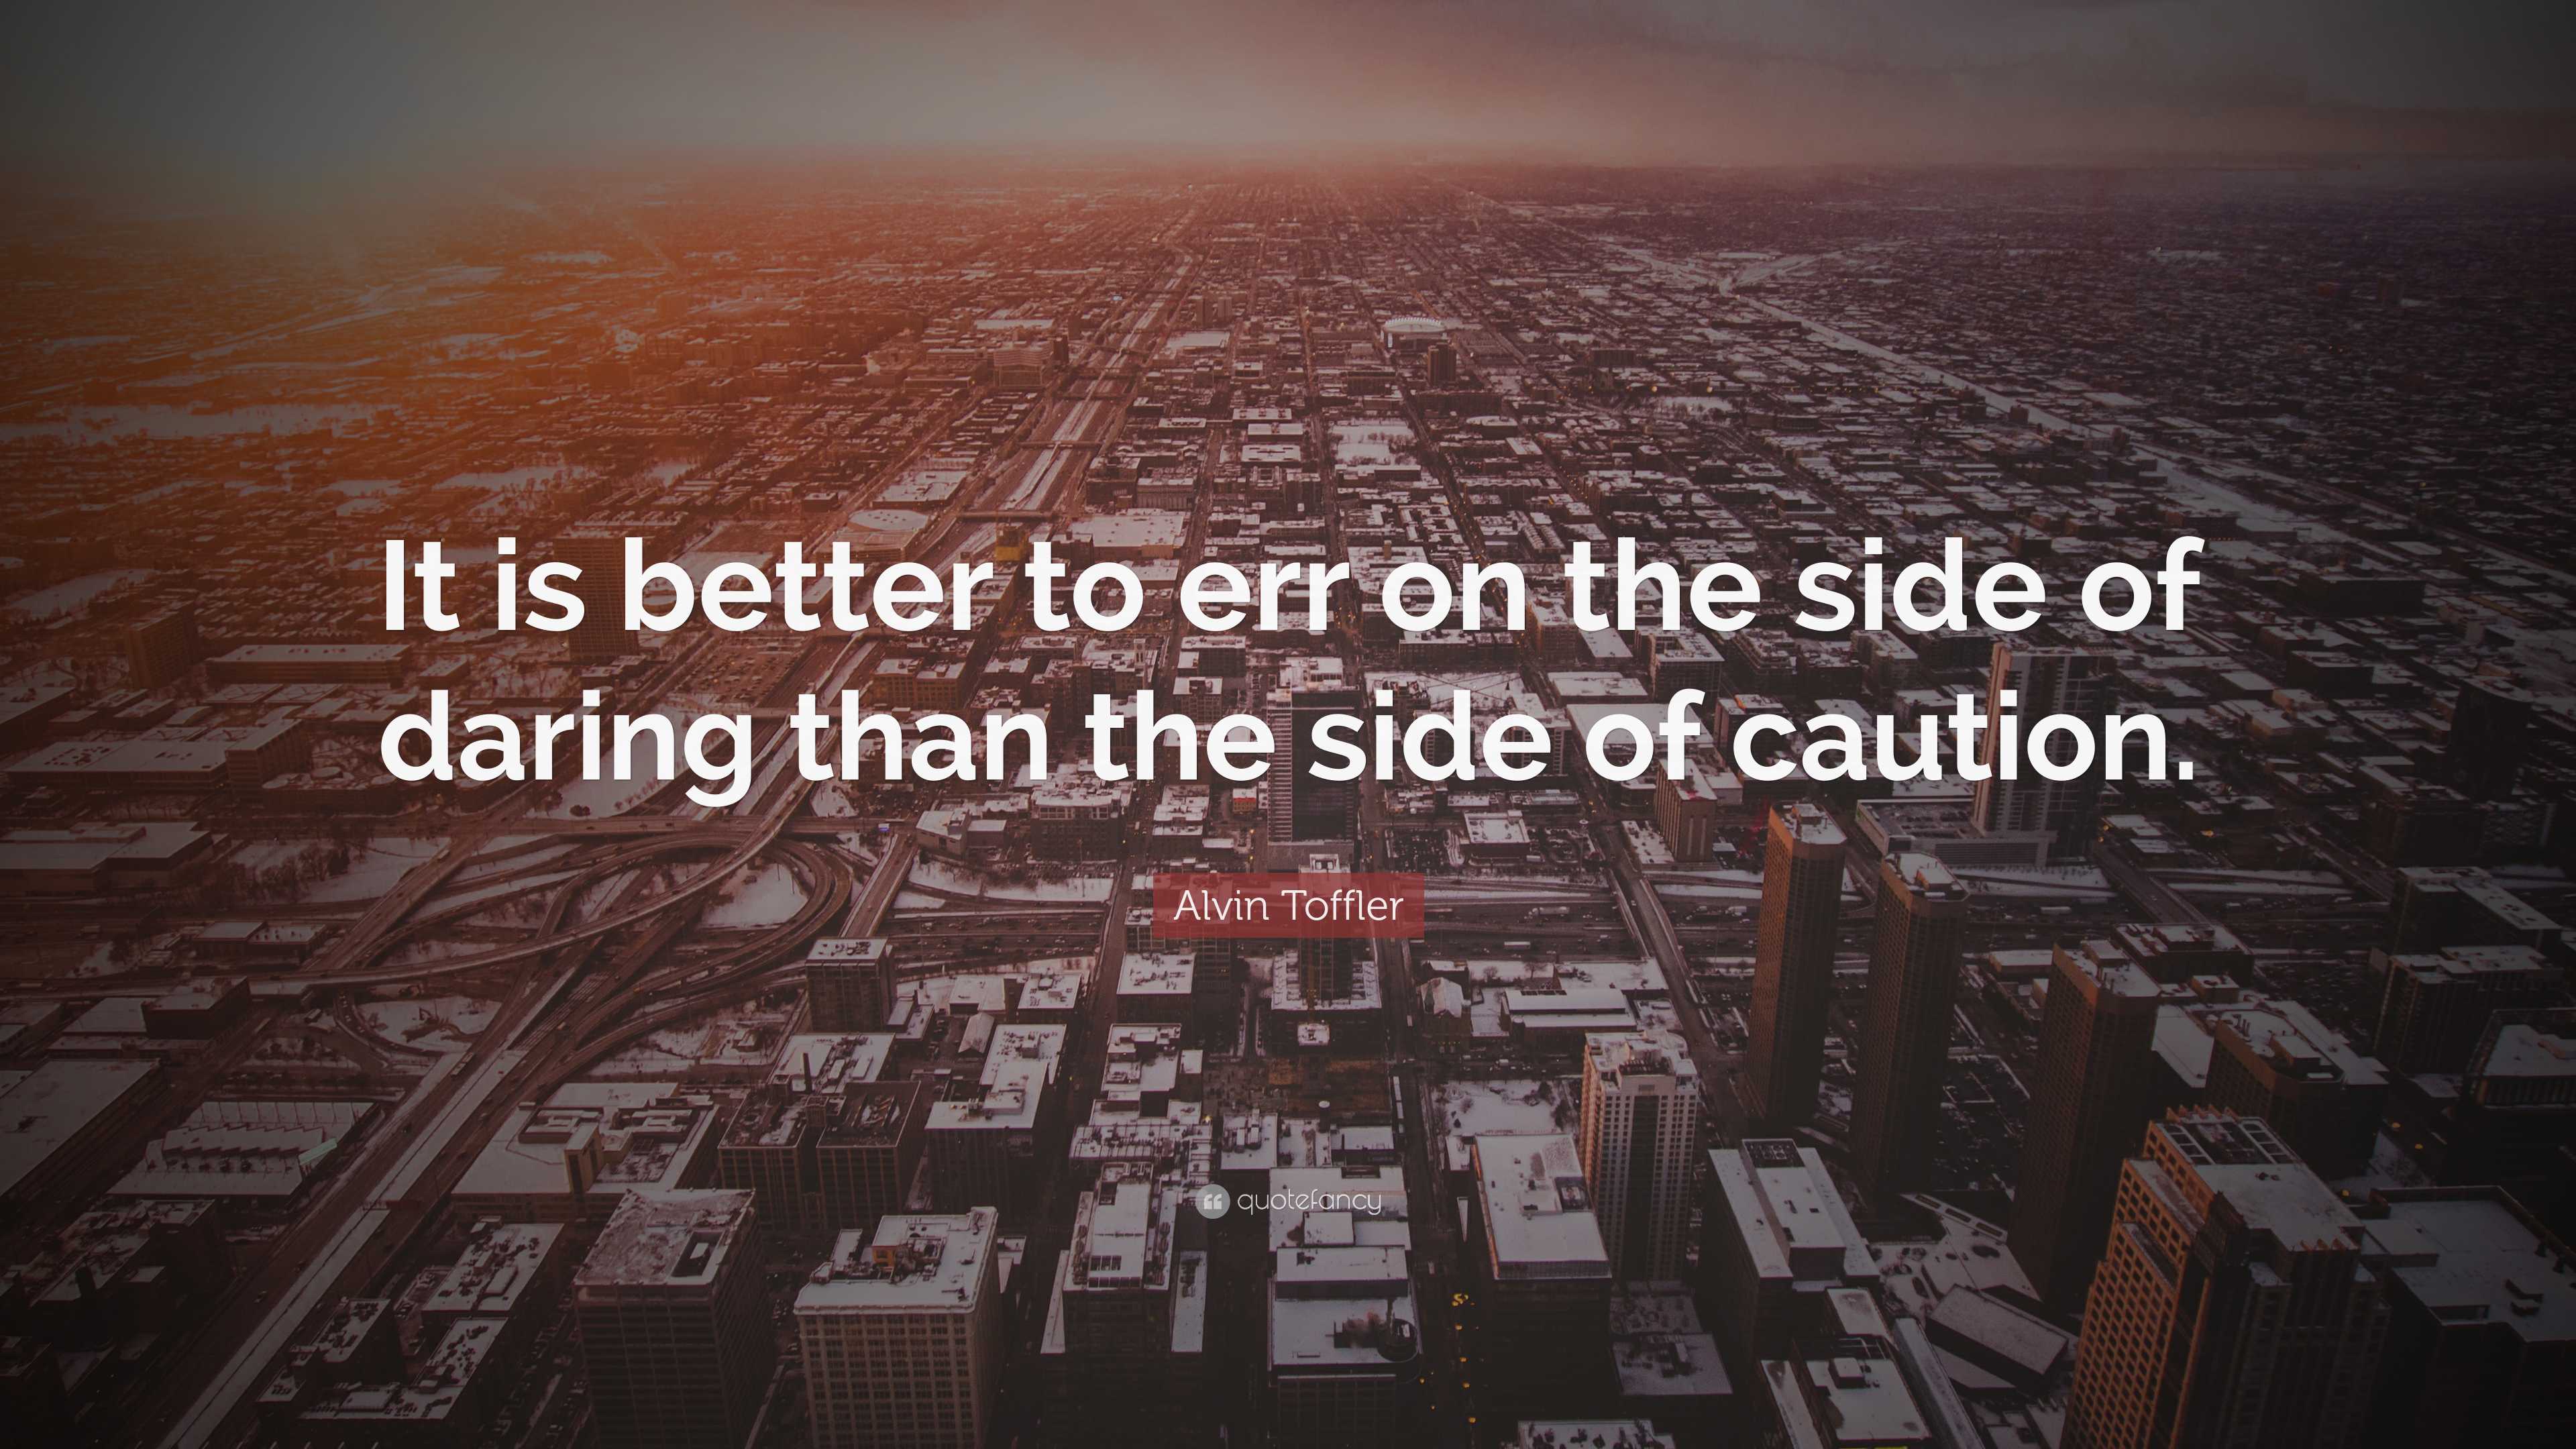 Alvin Toffler Quote: “It is better to err on the side of daring than ...